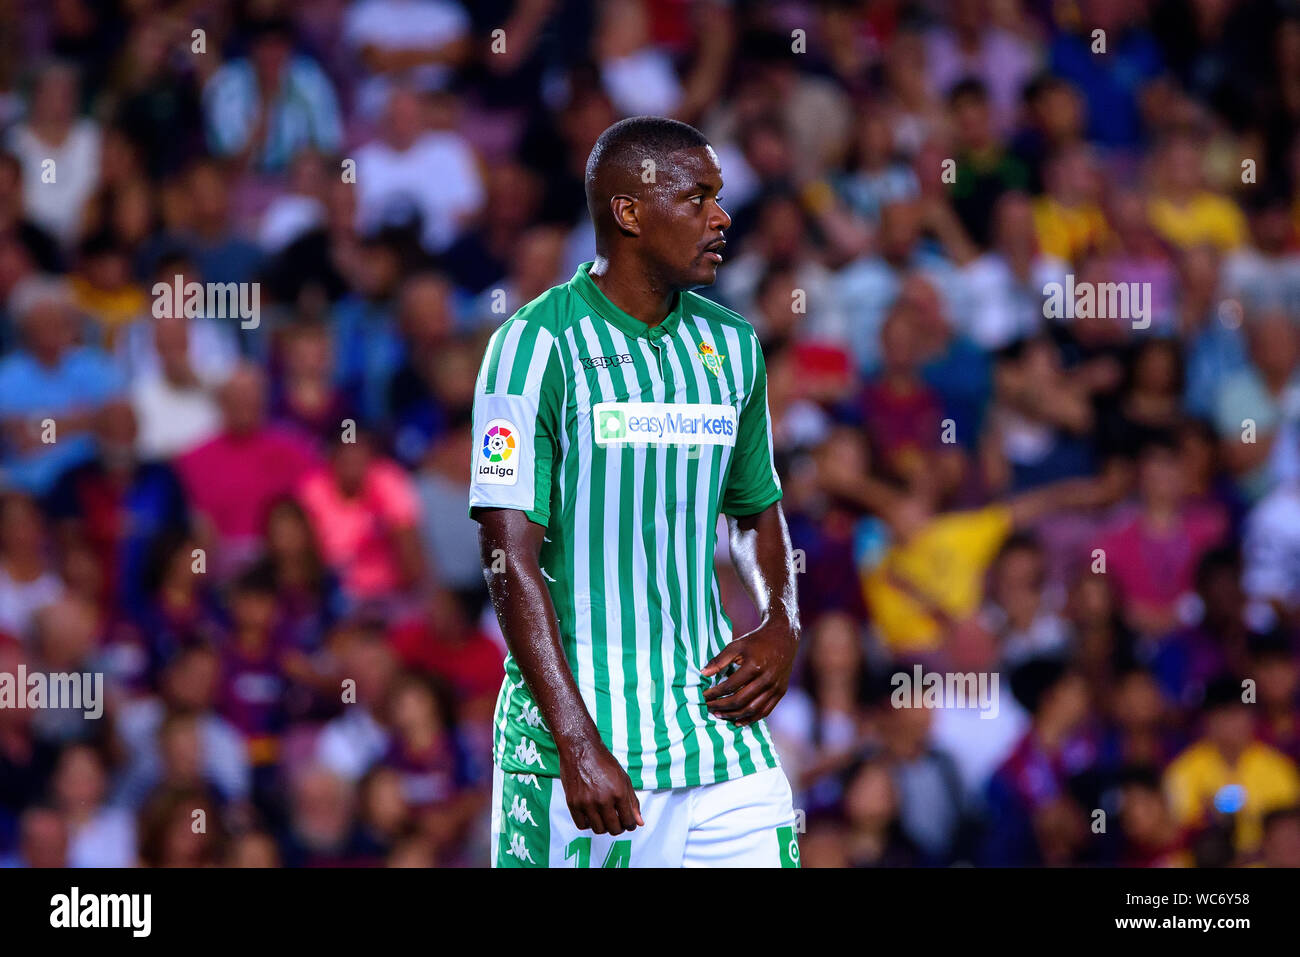 BARCELONA - AUG 25: William Carvalho plays at the La Liga match between FC Barcelona and Real Betis at the Camp Nou Stadium on August 25, 2019 in Barc Stock Photo